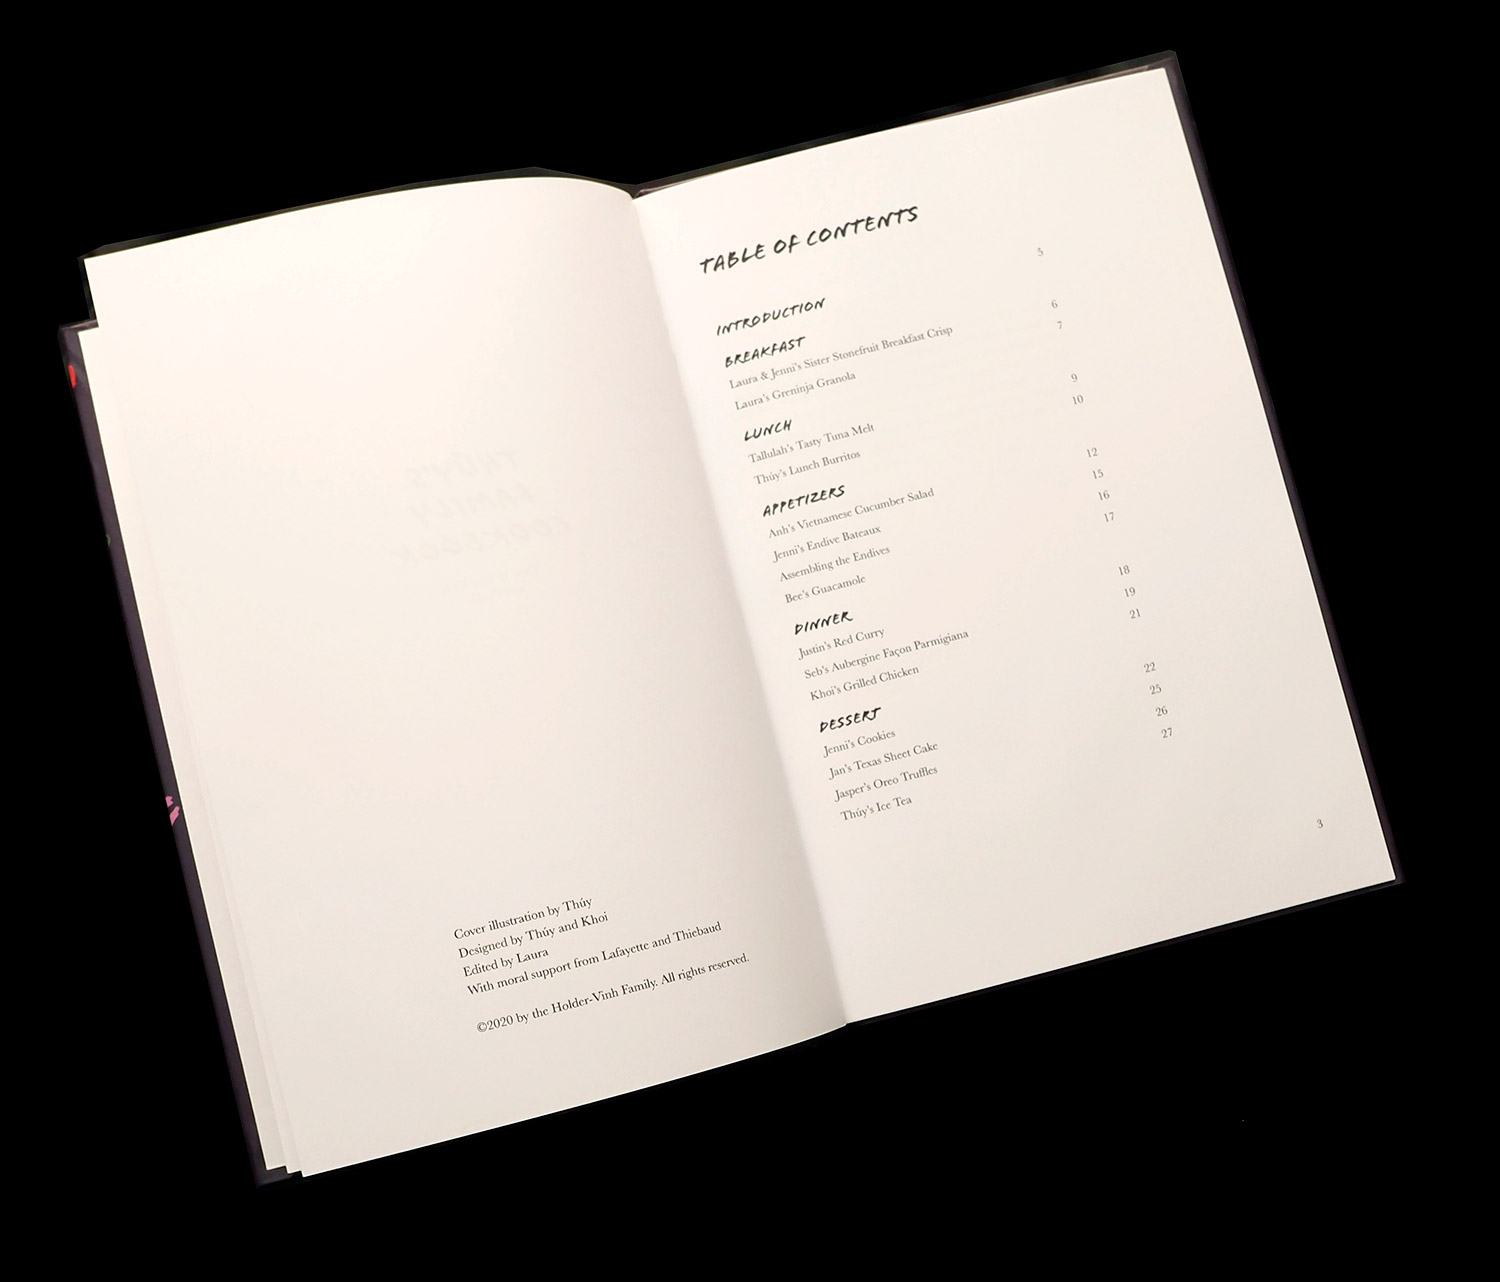 Table of Contents from “Thuy’s Family Cookbook 2020”